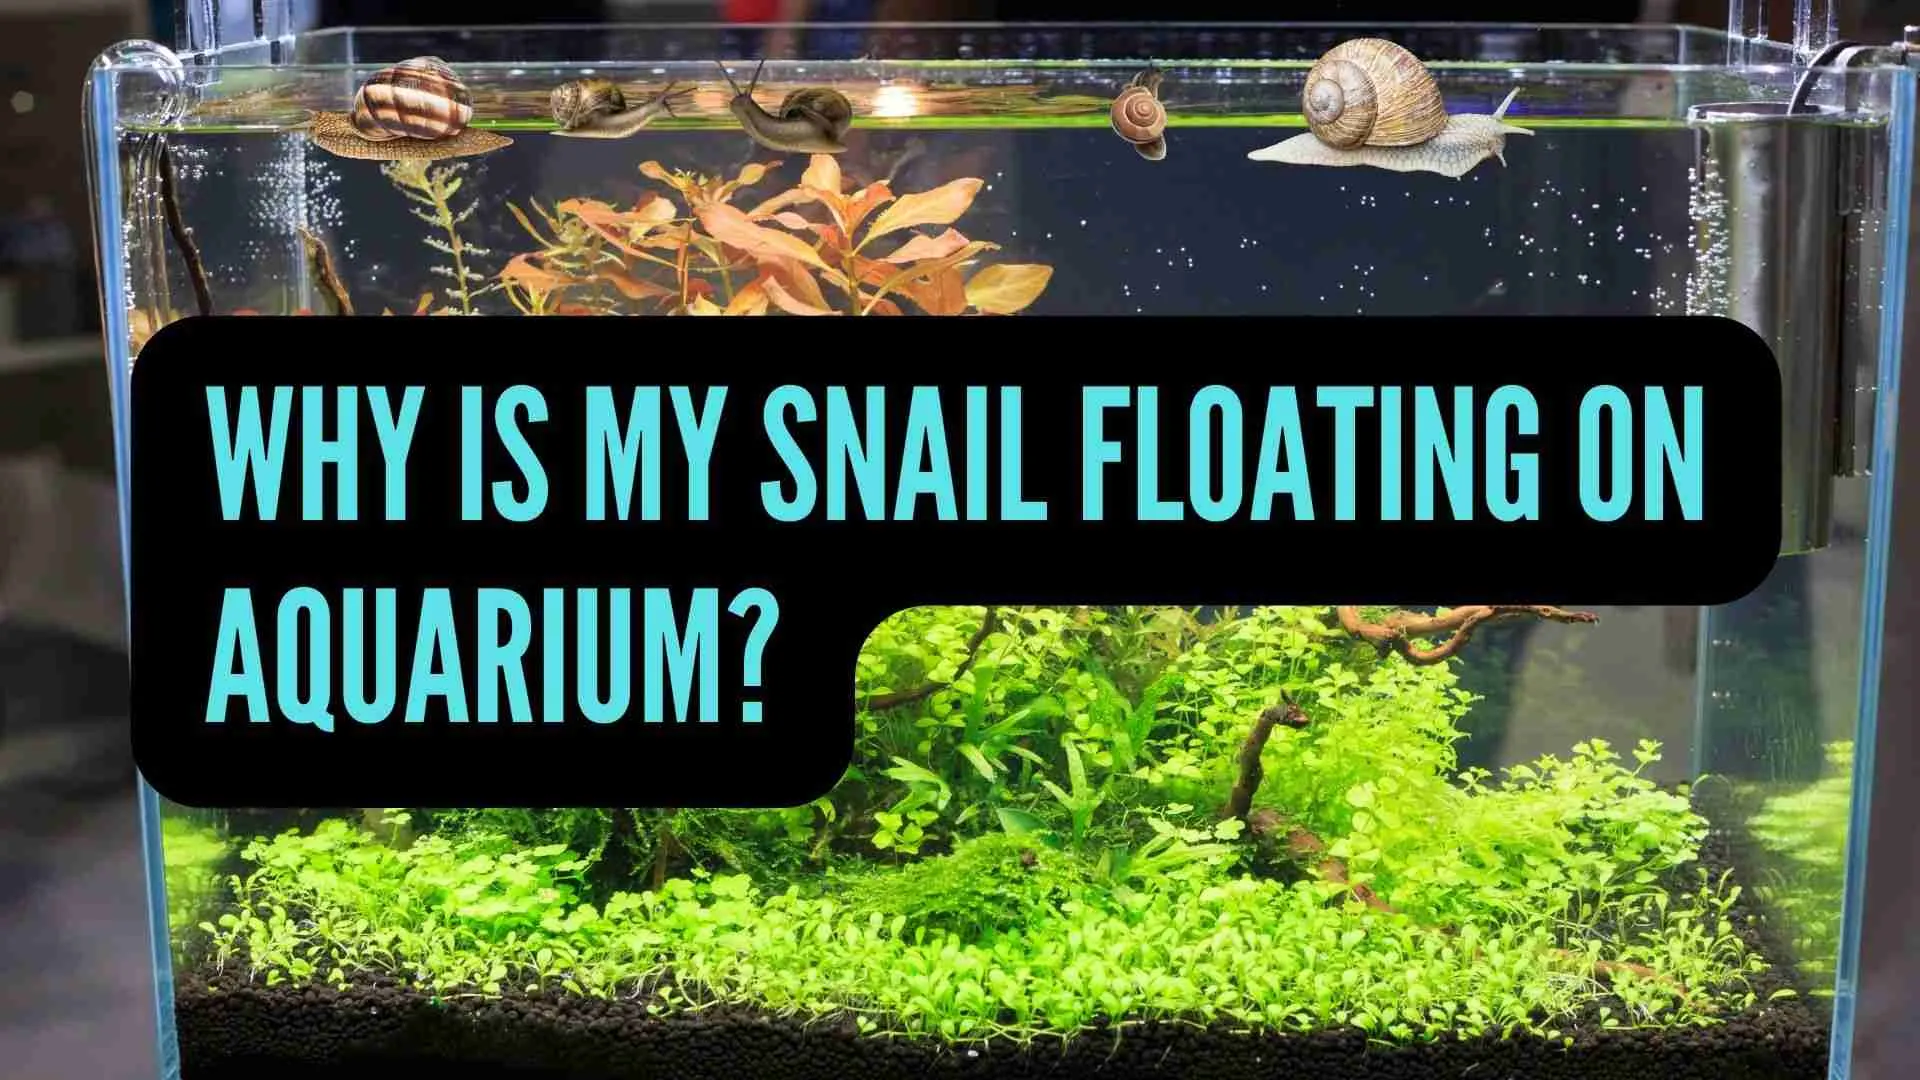 Why is my Snail Floating on Aquarium?